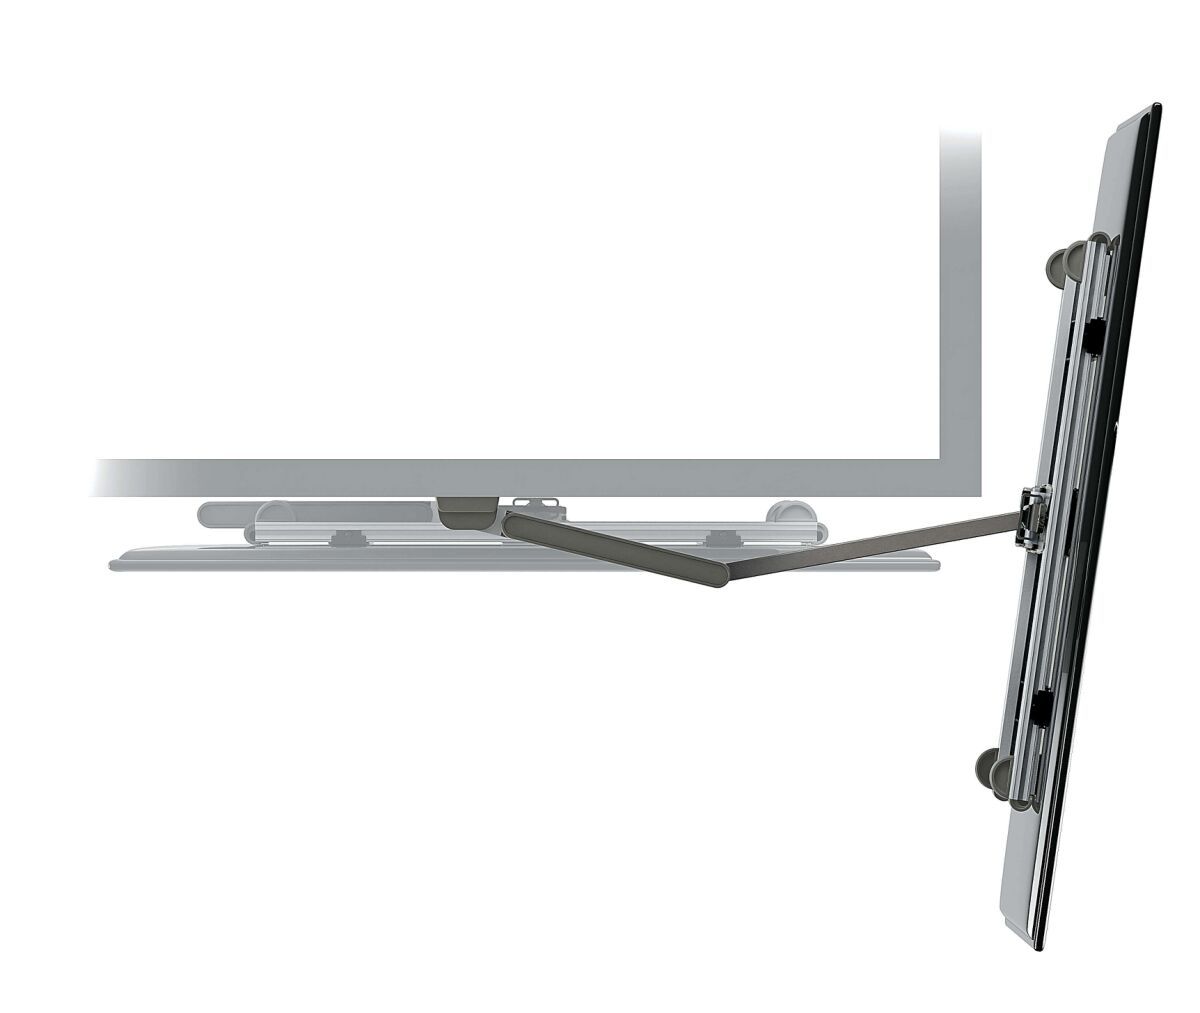 Vogel's THIN 245 UltraThin Full-Motion TV Wall Mount (black) - Suitable for 26 up to 55 inch TVs - Full motion (up to 180°) - Tilt up to 20° - Top view